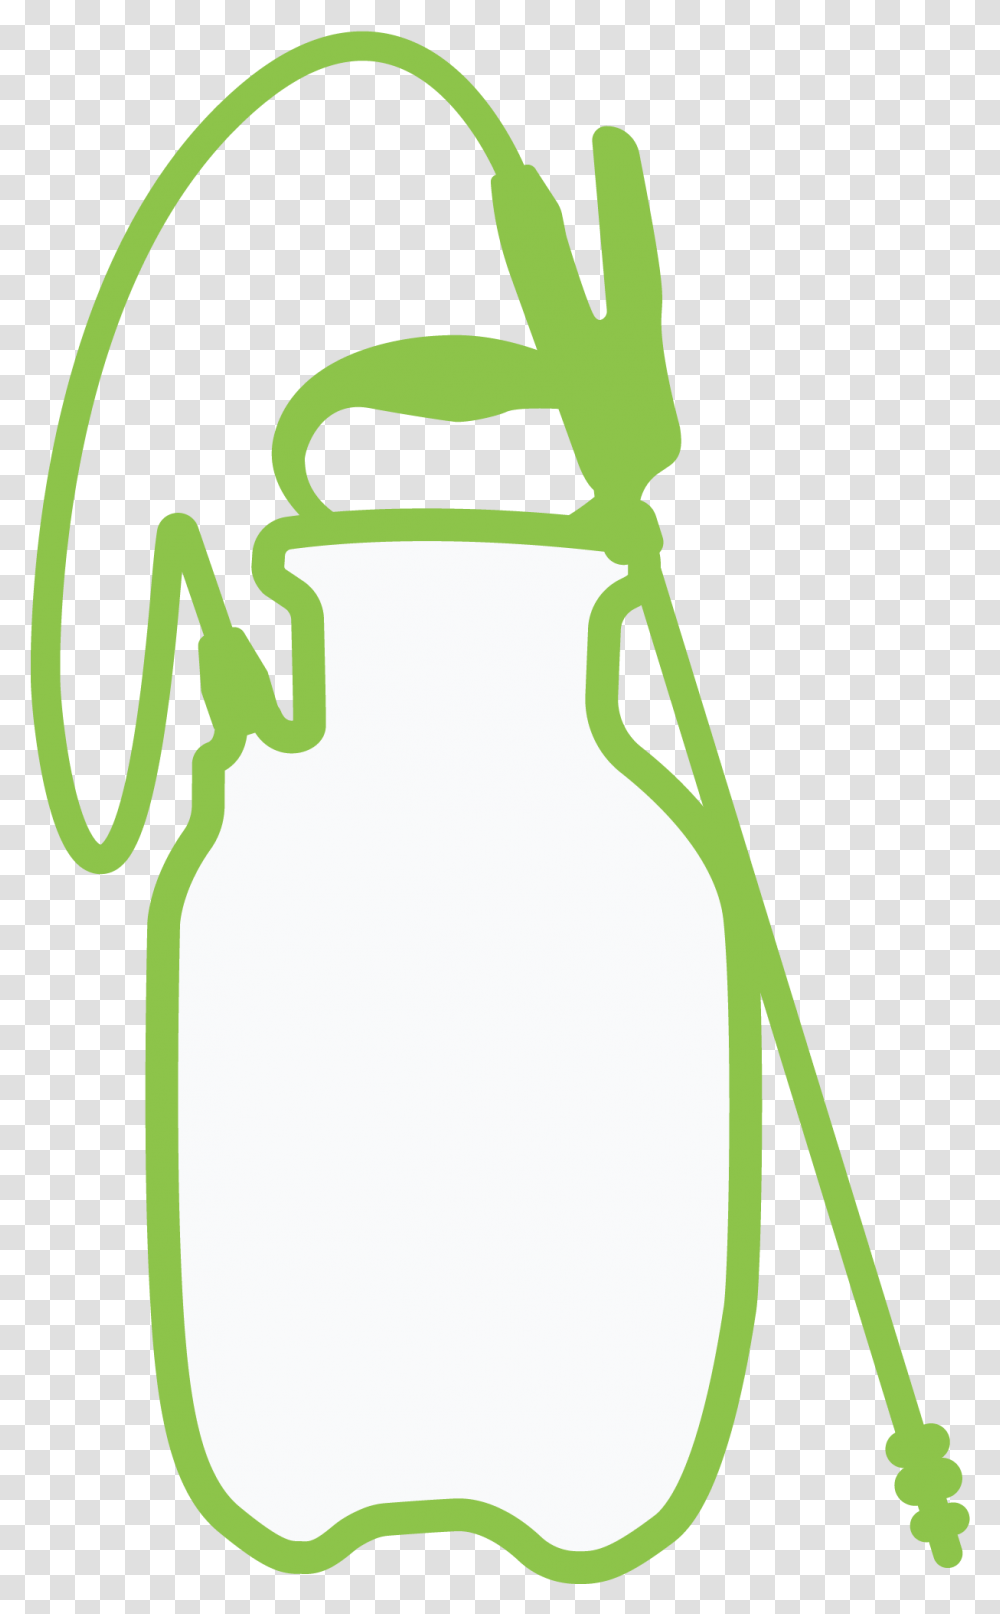 Mowing And Trimming For All Lawns Language, Bottle, Green, Jug, Water Bottle Transparent Png